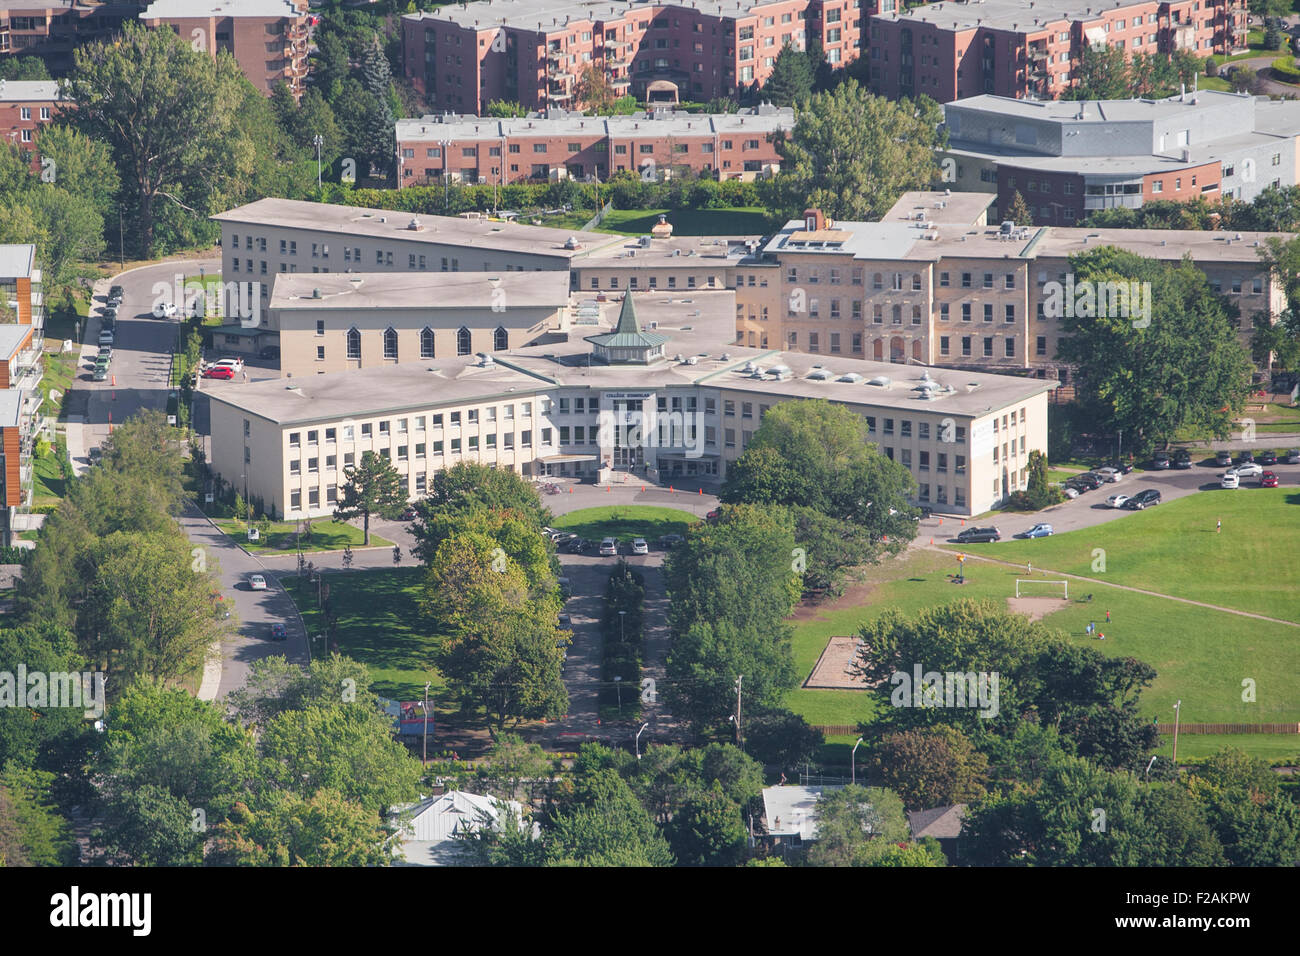 College Stanislas school is pictured in this aerial photo in Quebec city Stock Photo